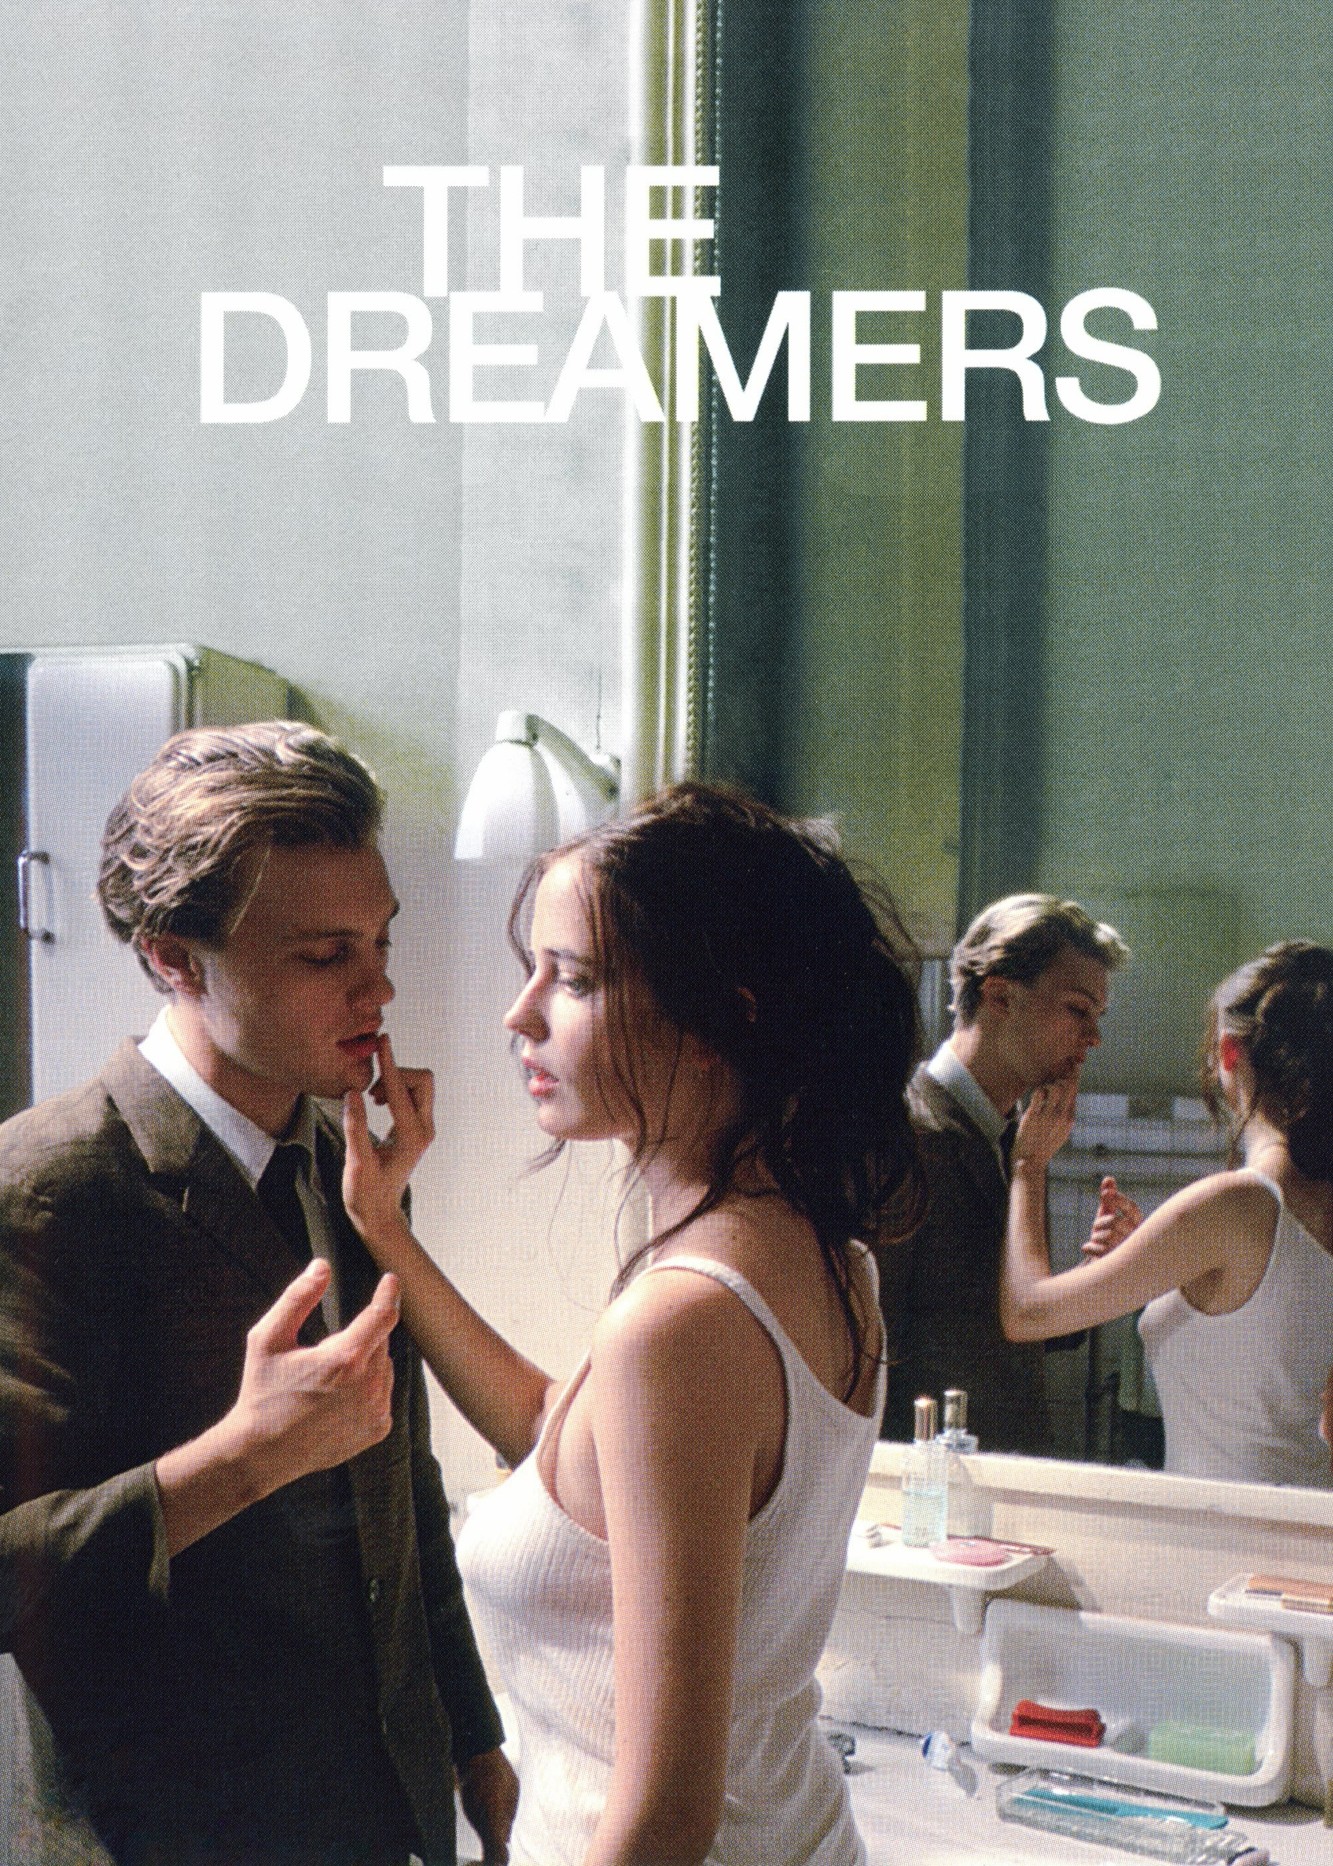 The Dreamers | The Dreamers (2003)